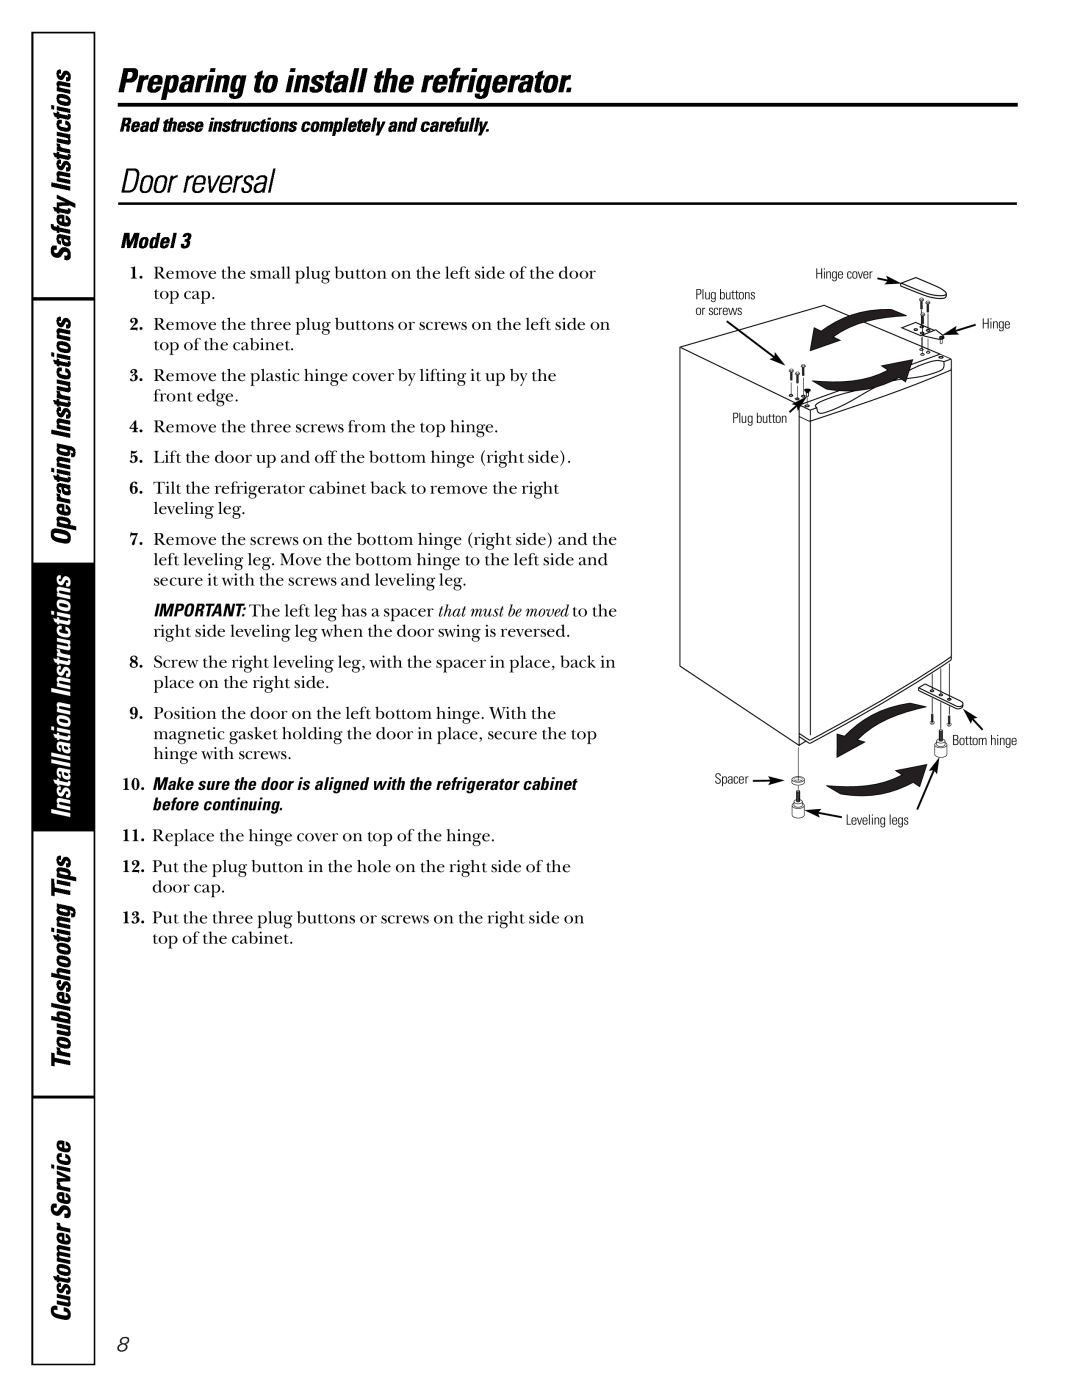 GE 2, 3, and 4 owner manual Door reversal, SafetyInstructions, Model, Preparing to install the refrigerator, CustomerService 